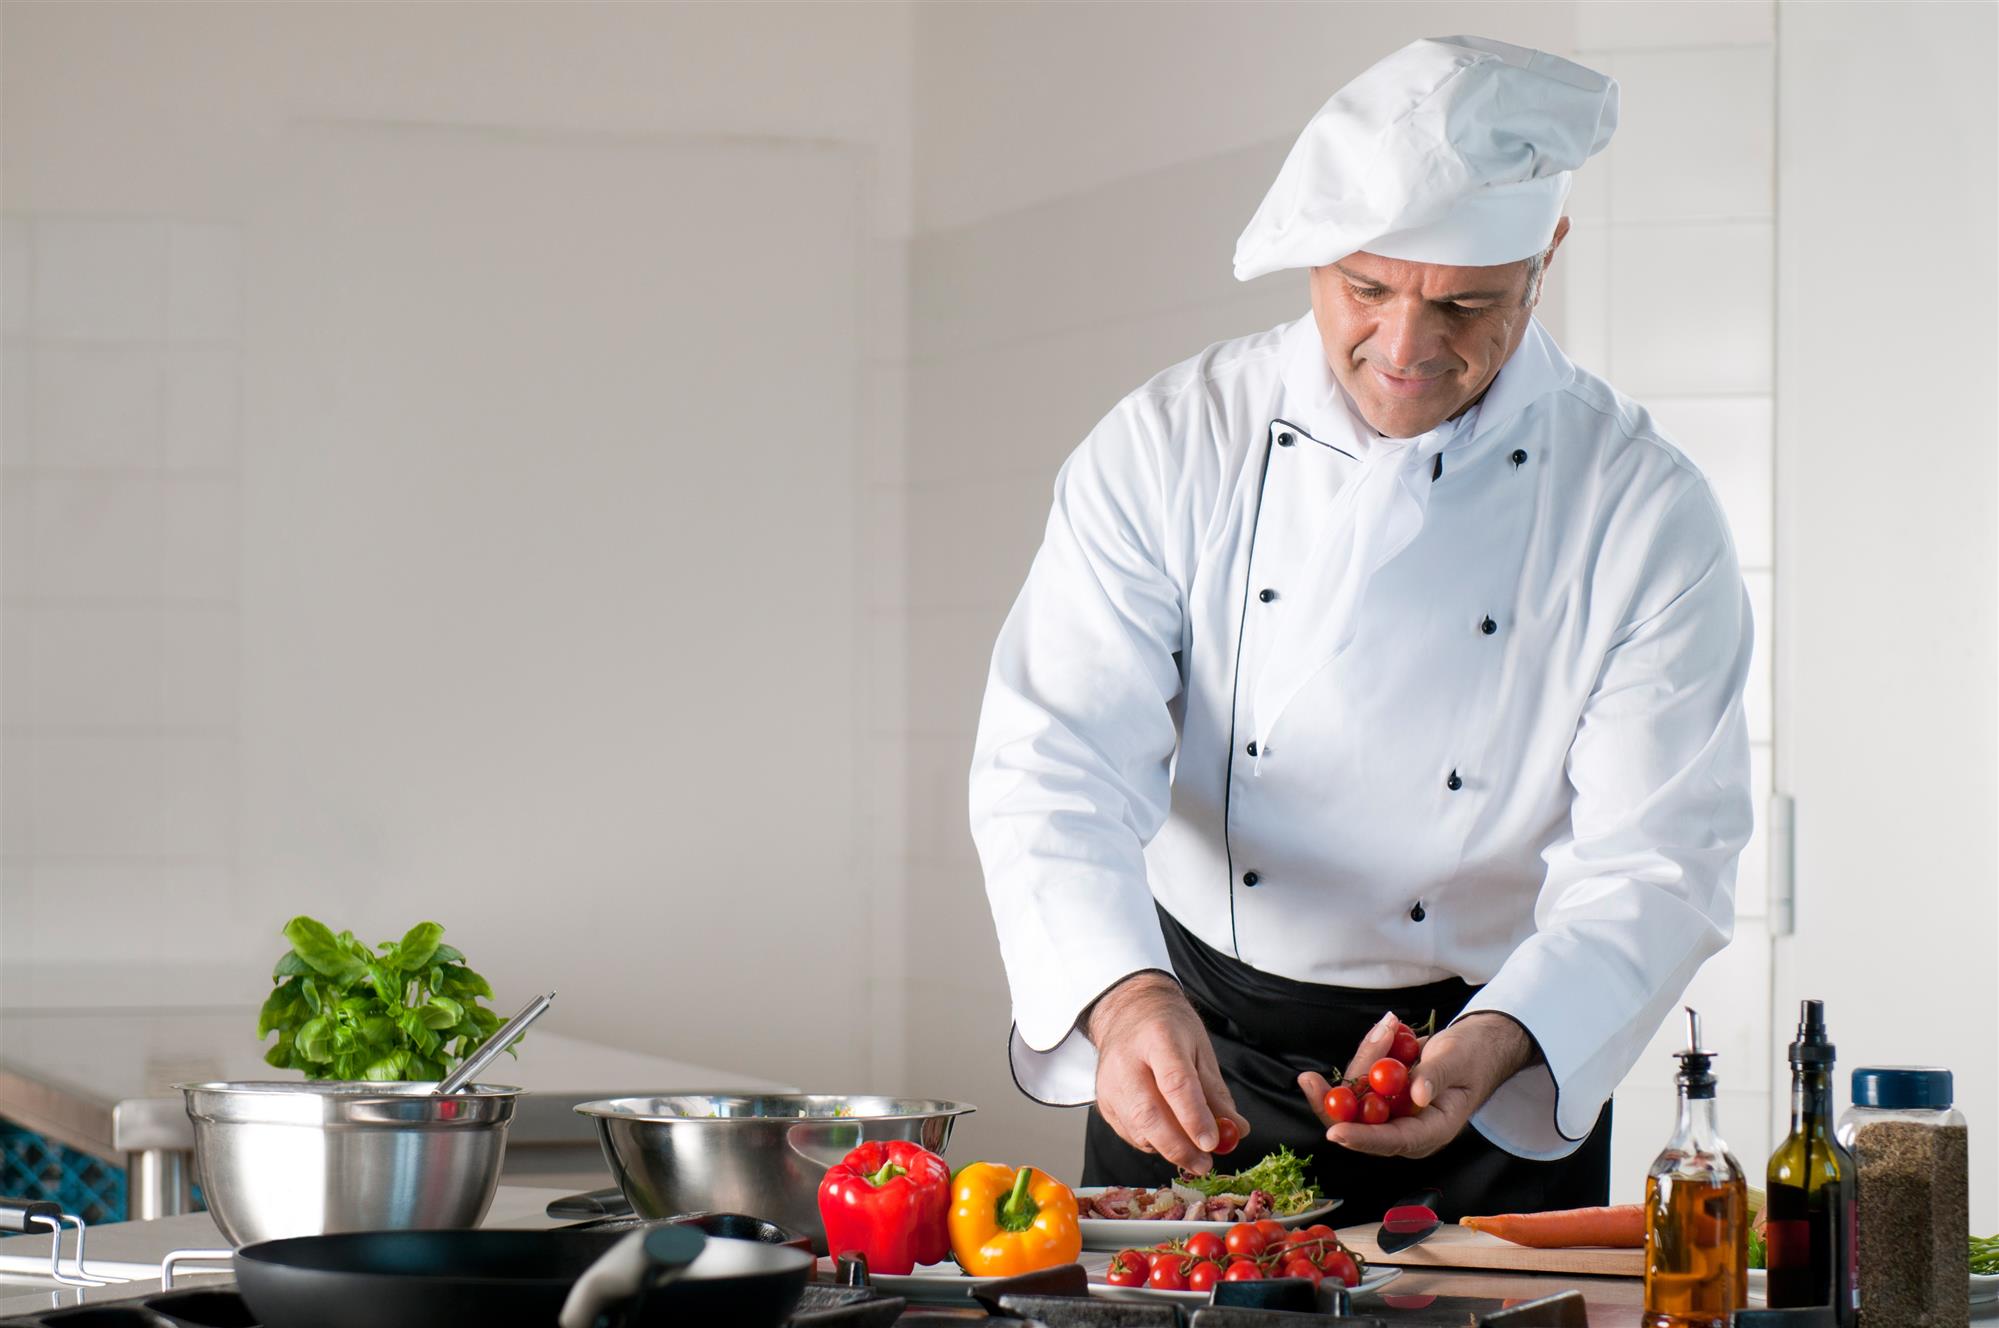 chef preparing a meal with various vegetables